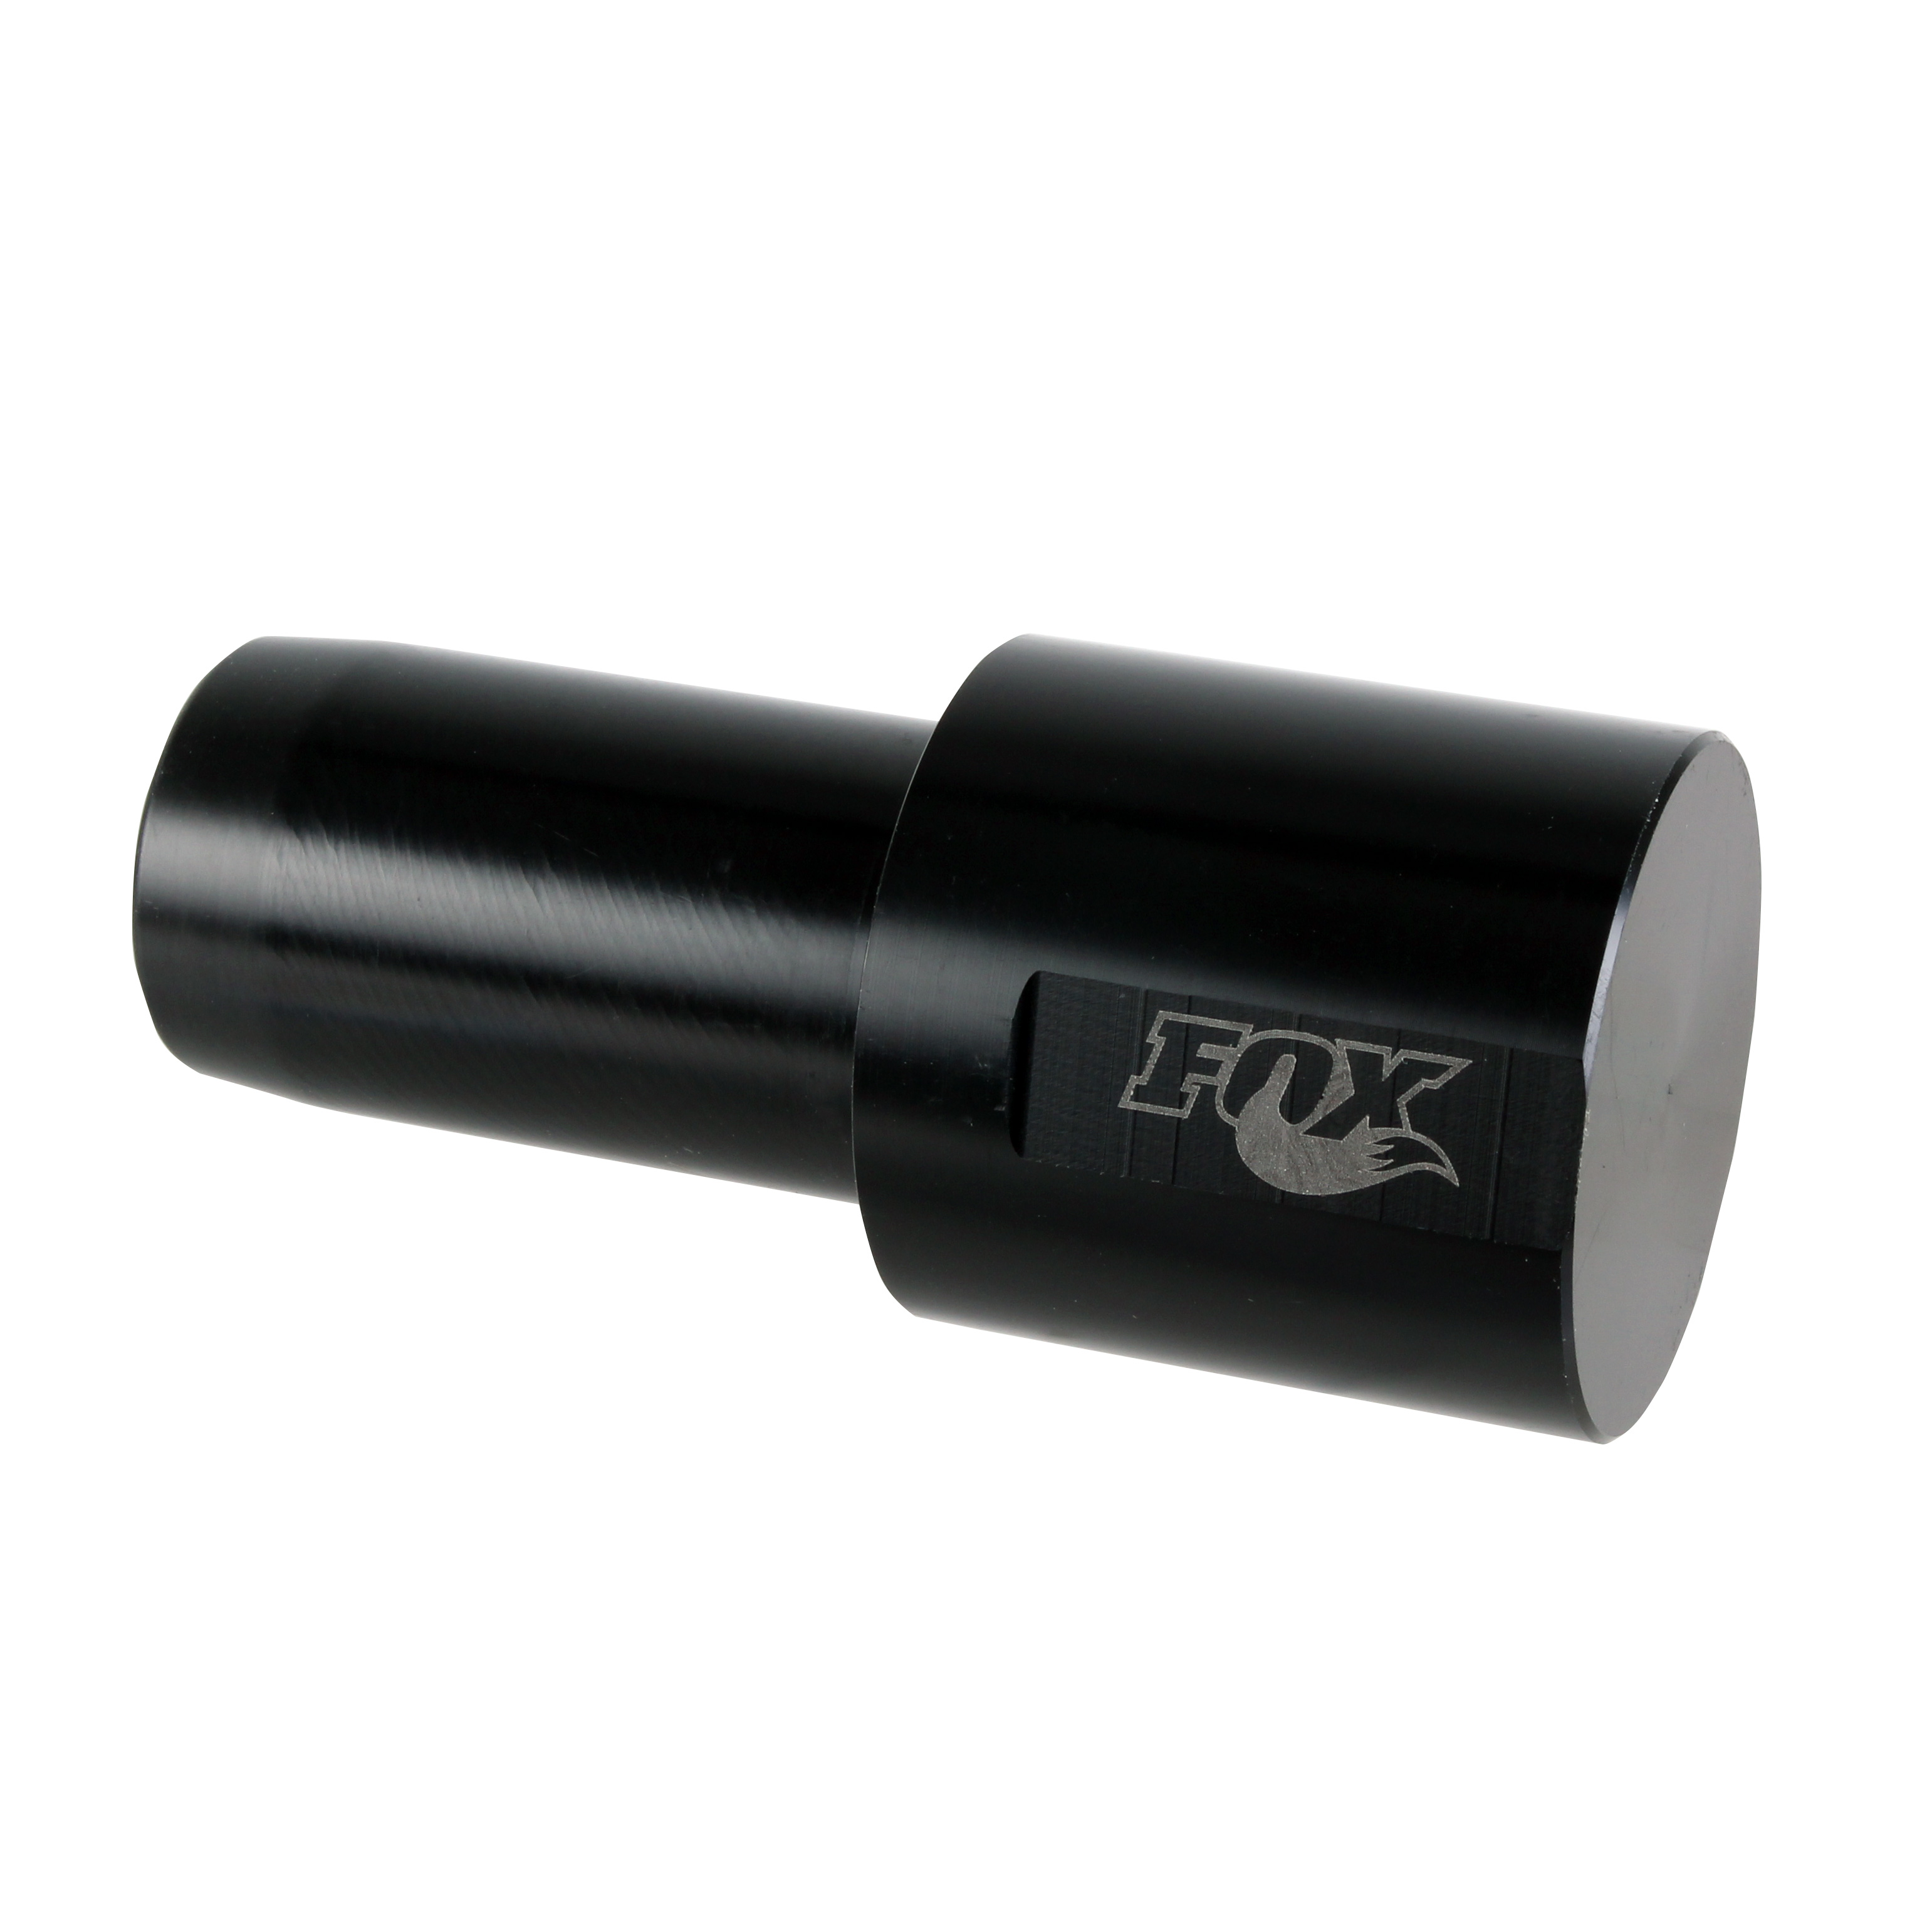 Fox Shox Guided Fork Seal Driver, One Piece Seal/Wiper, 34mm